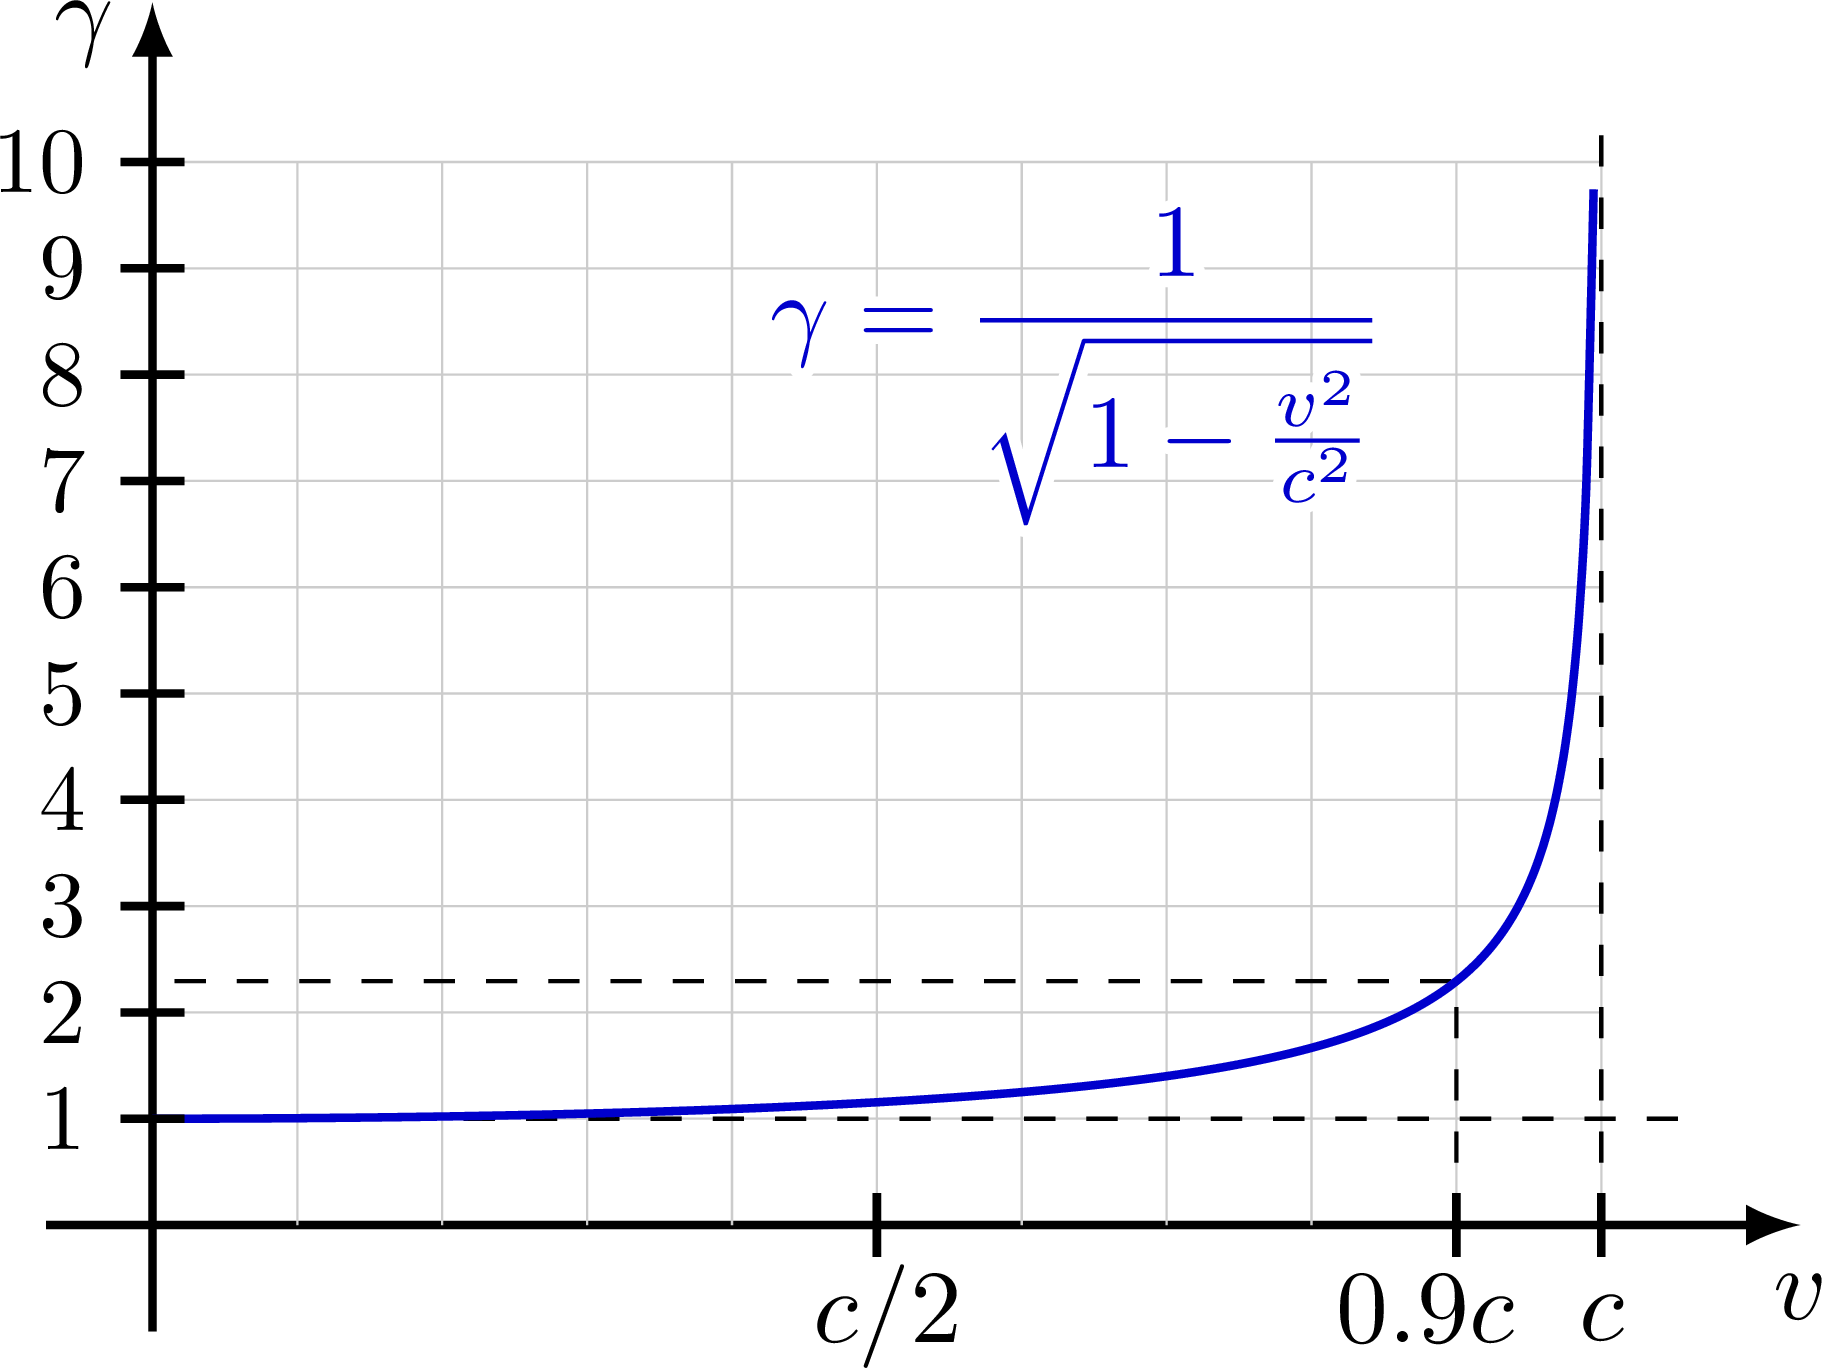 Plot of the Lorentz factor as a function of velocity.